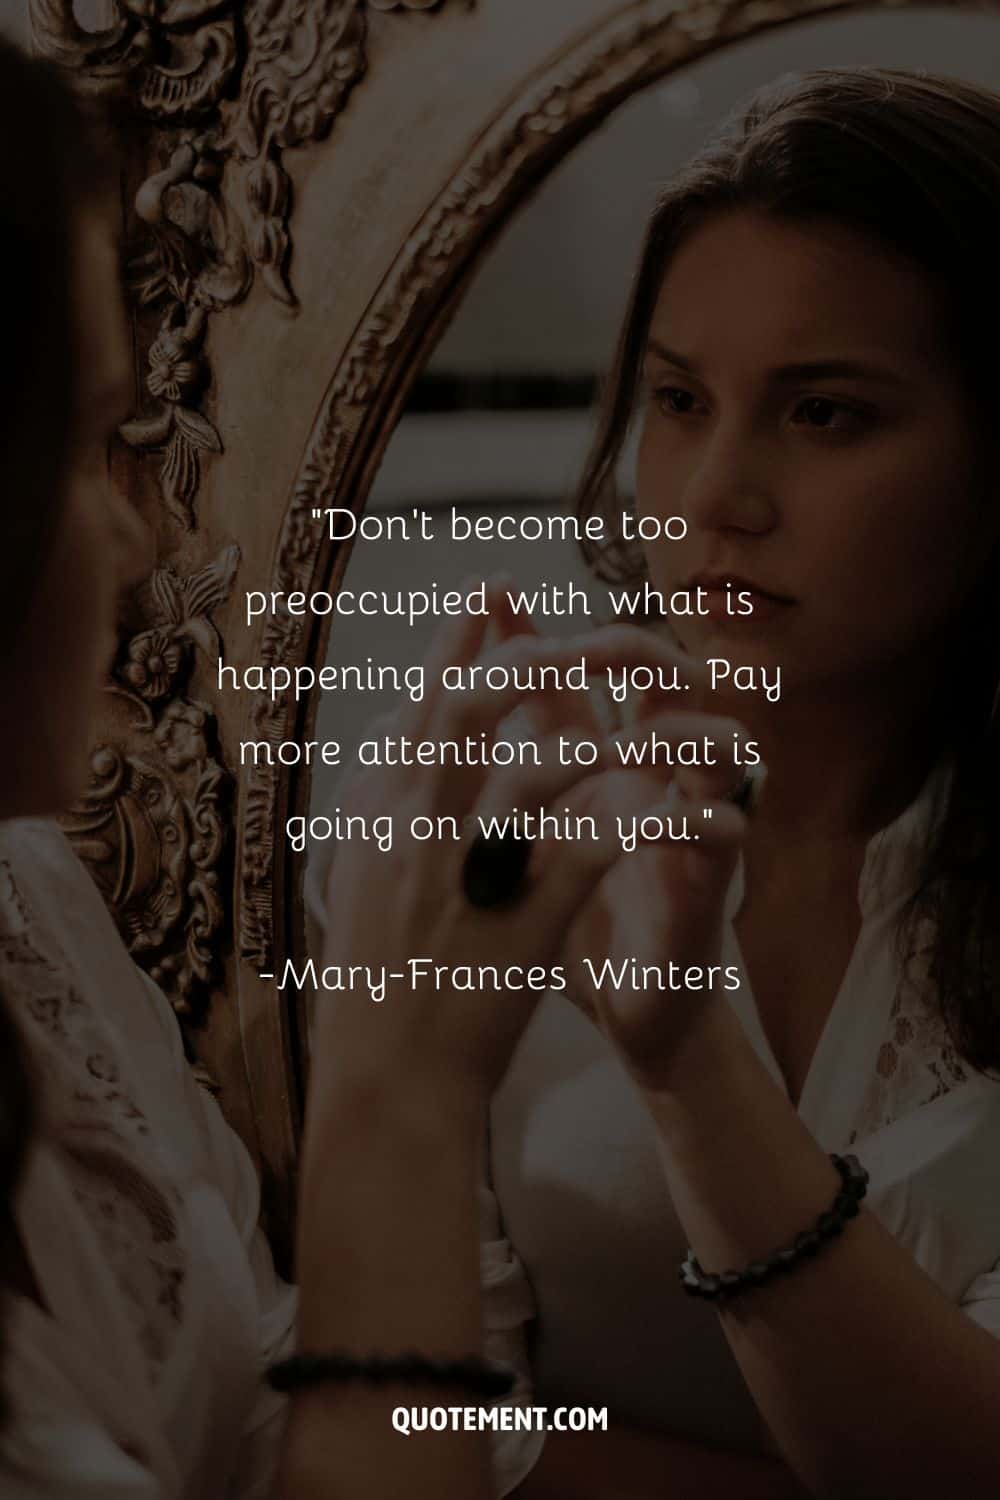 Don’t become too preoccupied with what is happening around you. Pay more attention to what is going on within you. – Mary-Frances Winters